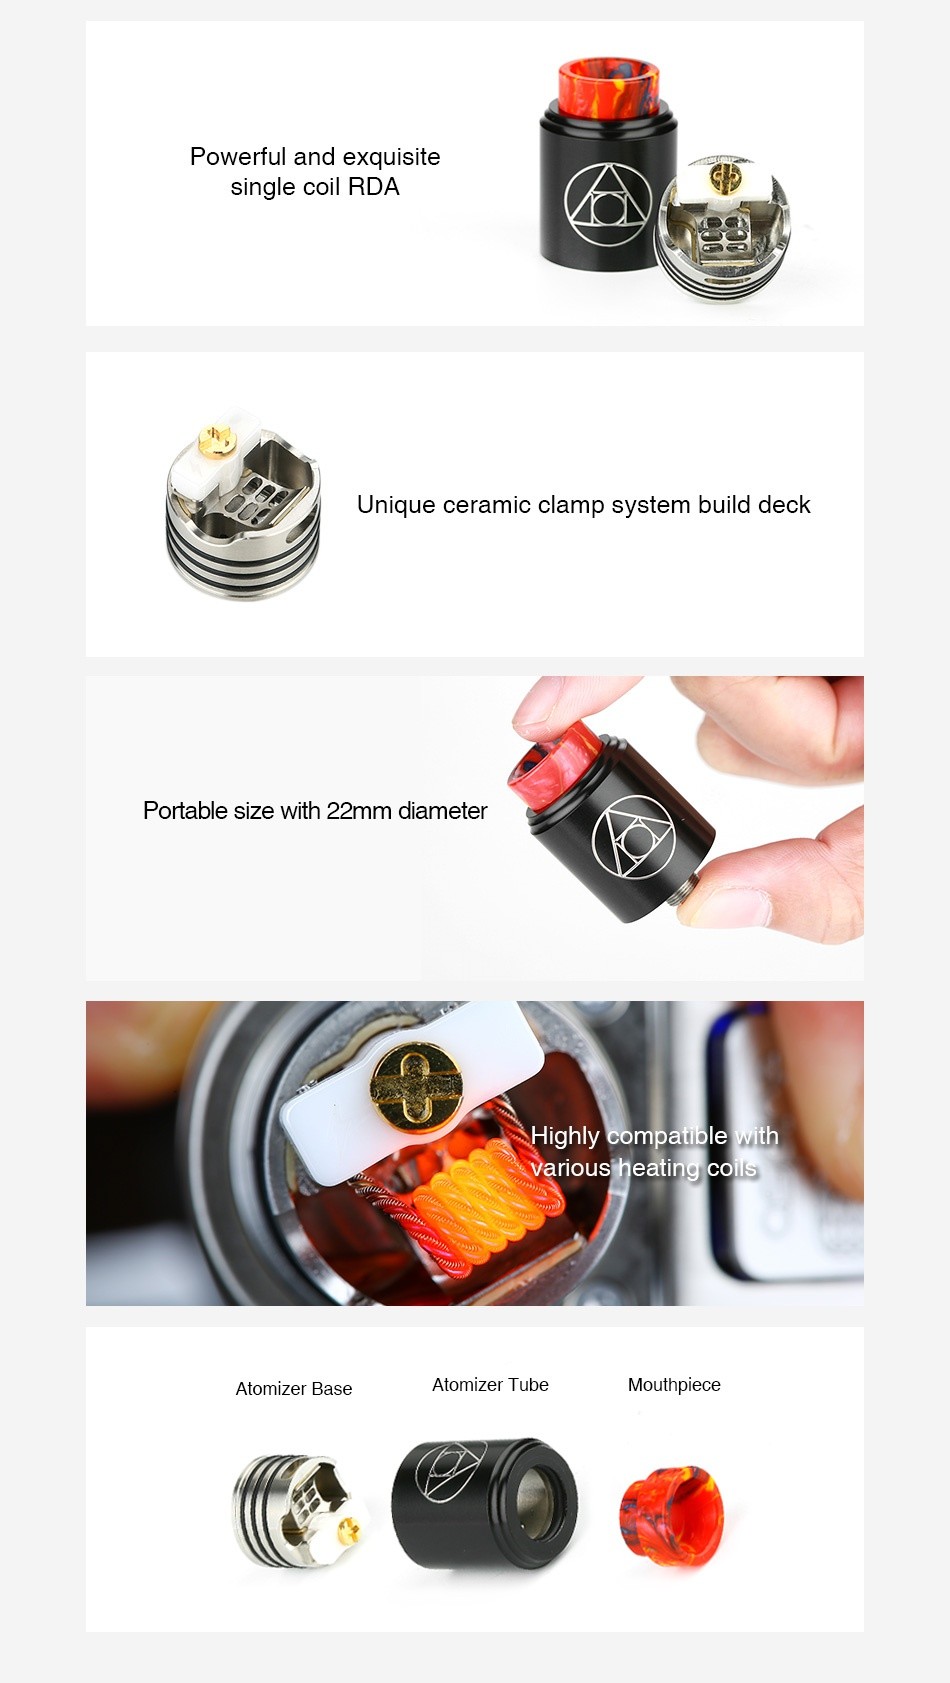 Blitz Hermetic RDA Powerful and exquisite single coil RDA Unique ceramic clamp system build deck Portable size with 22mm diameter Highly compatible with various heating coil Atomizer base Atomizer tube Mouthpiece